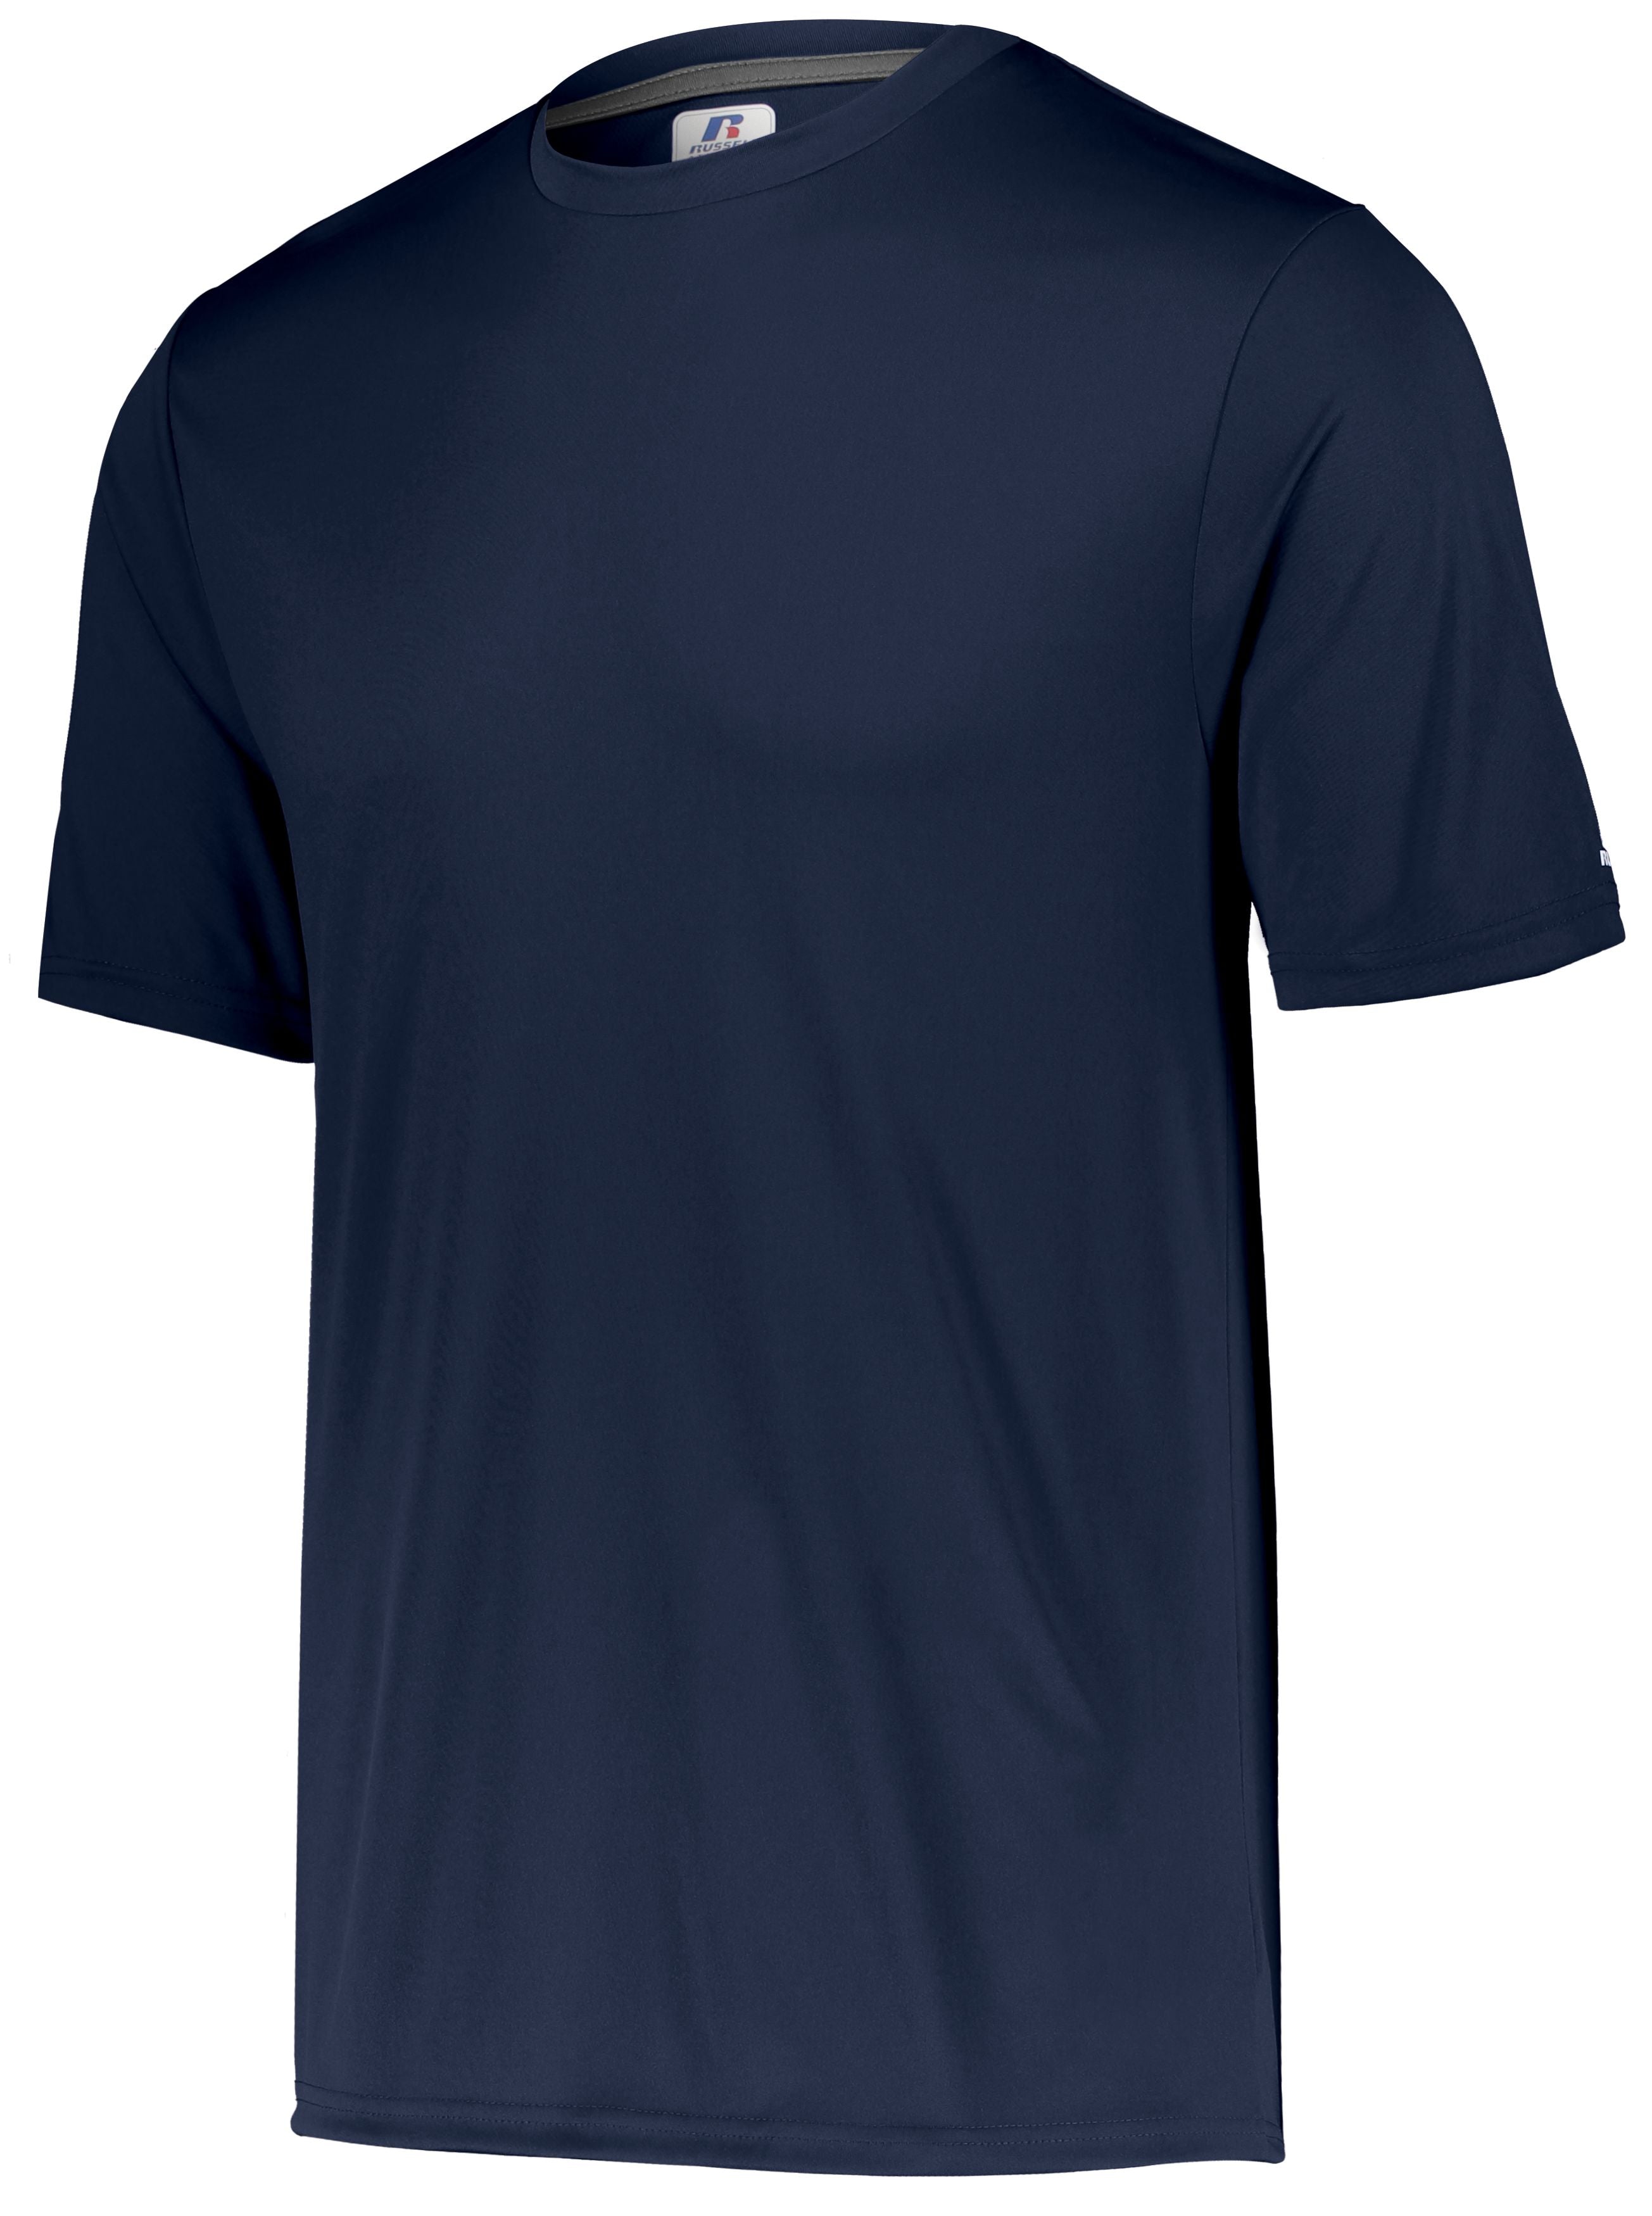 Russell Athletic Dri-Power Core Performance Tee in Navy  -Part of the Adult, Adult-Tee-Shirt, T-Shirts, Russell-Athletic-Products, Shirts product lines at KanaleyCreations.com